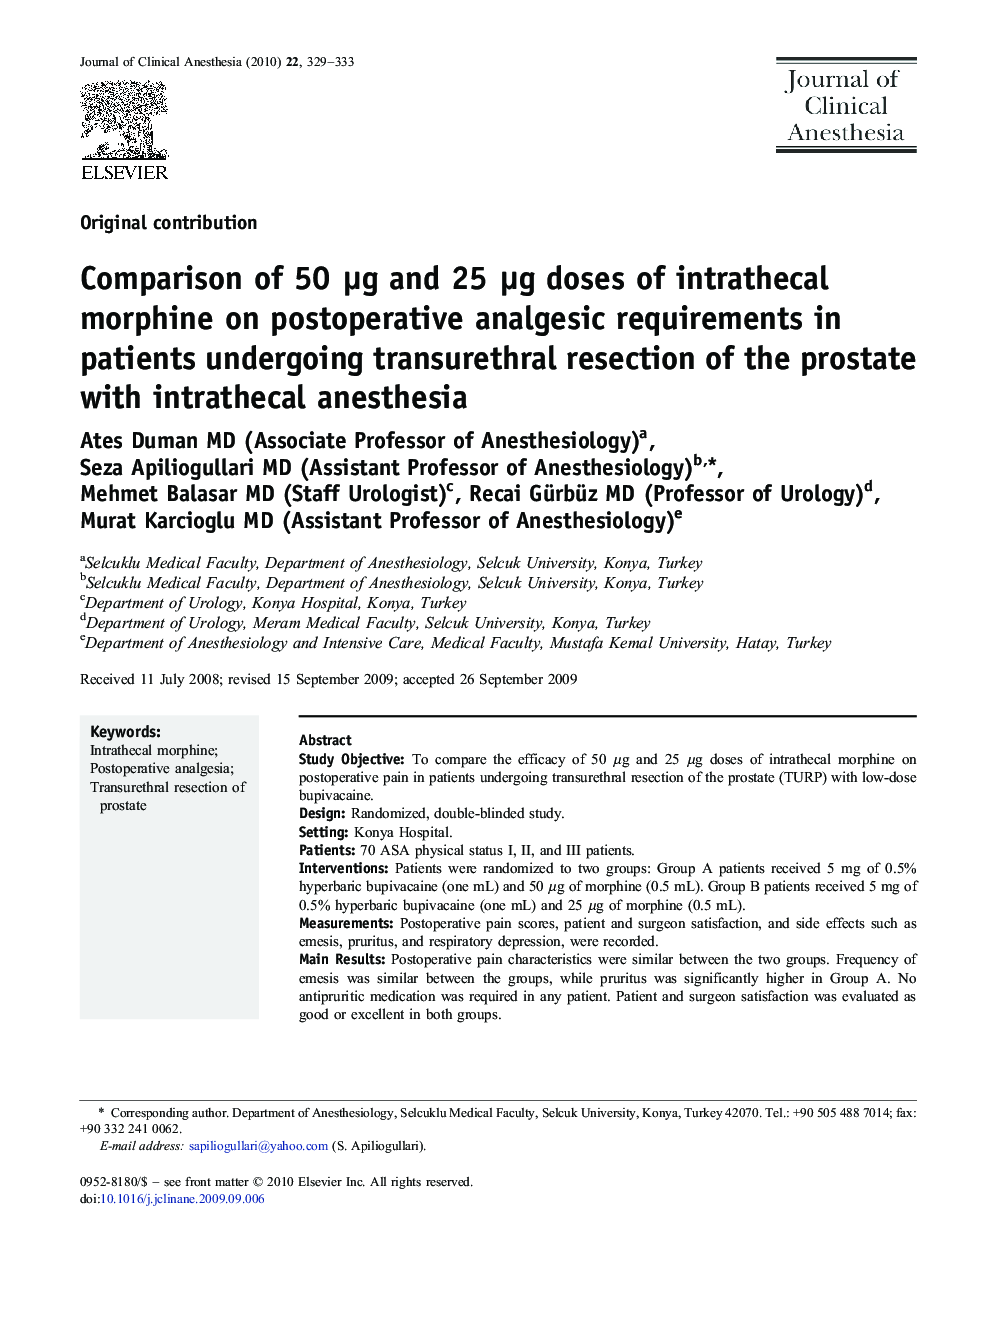 Comparison of 50 Î¼g and 25 Î¼g doses of intrathecal morphine on postoperative analgesic requirements in patients undergoing transurethral resection of the prostate with intrathecal anesthesia